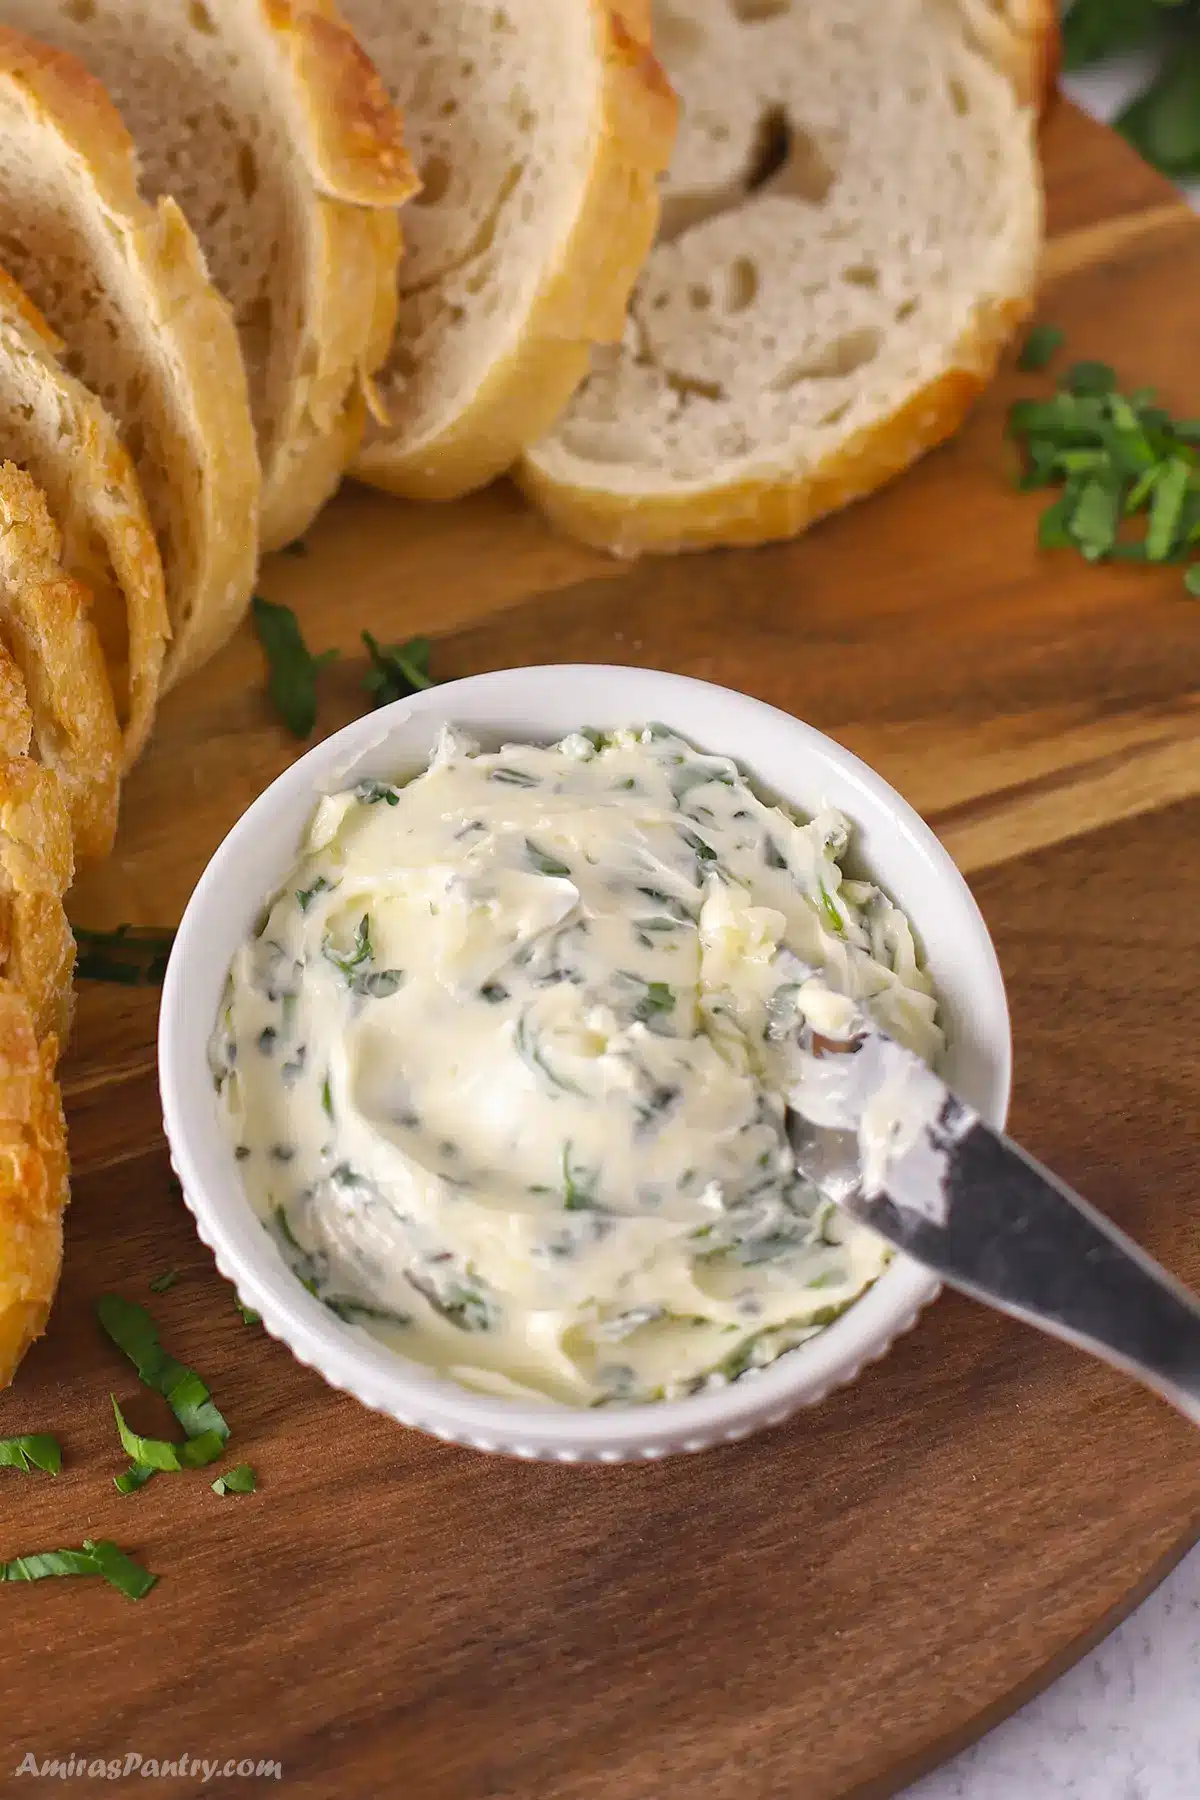 A bowl of garlic butter with bread on the side.